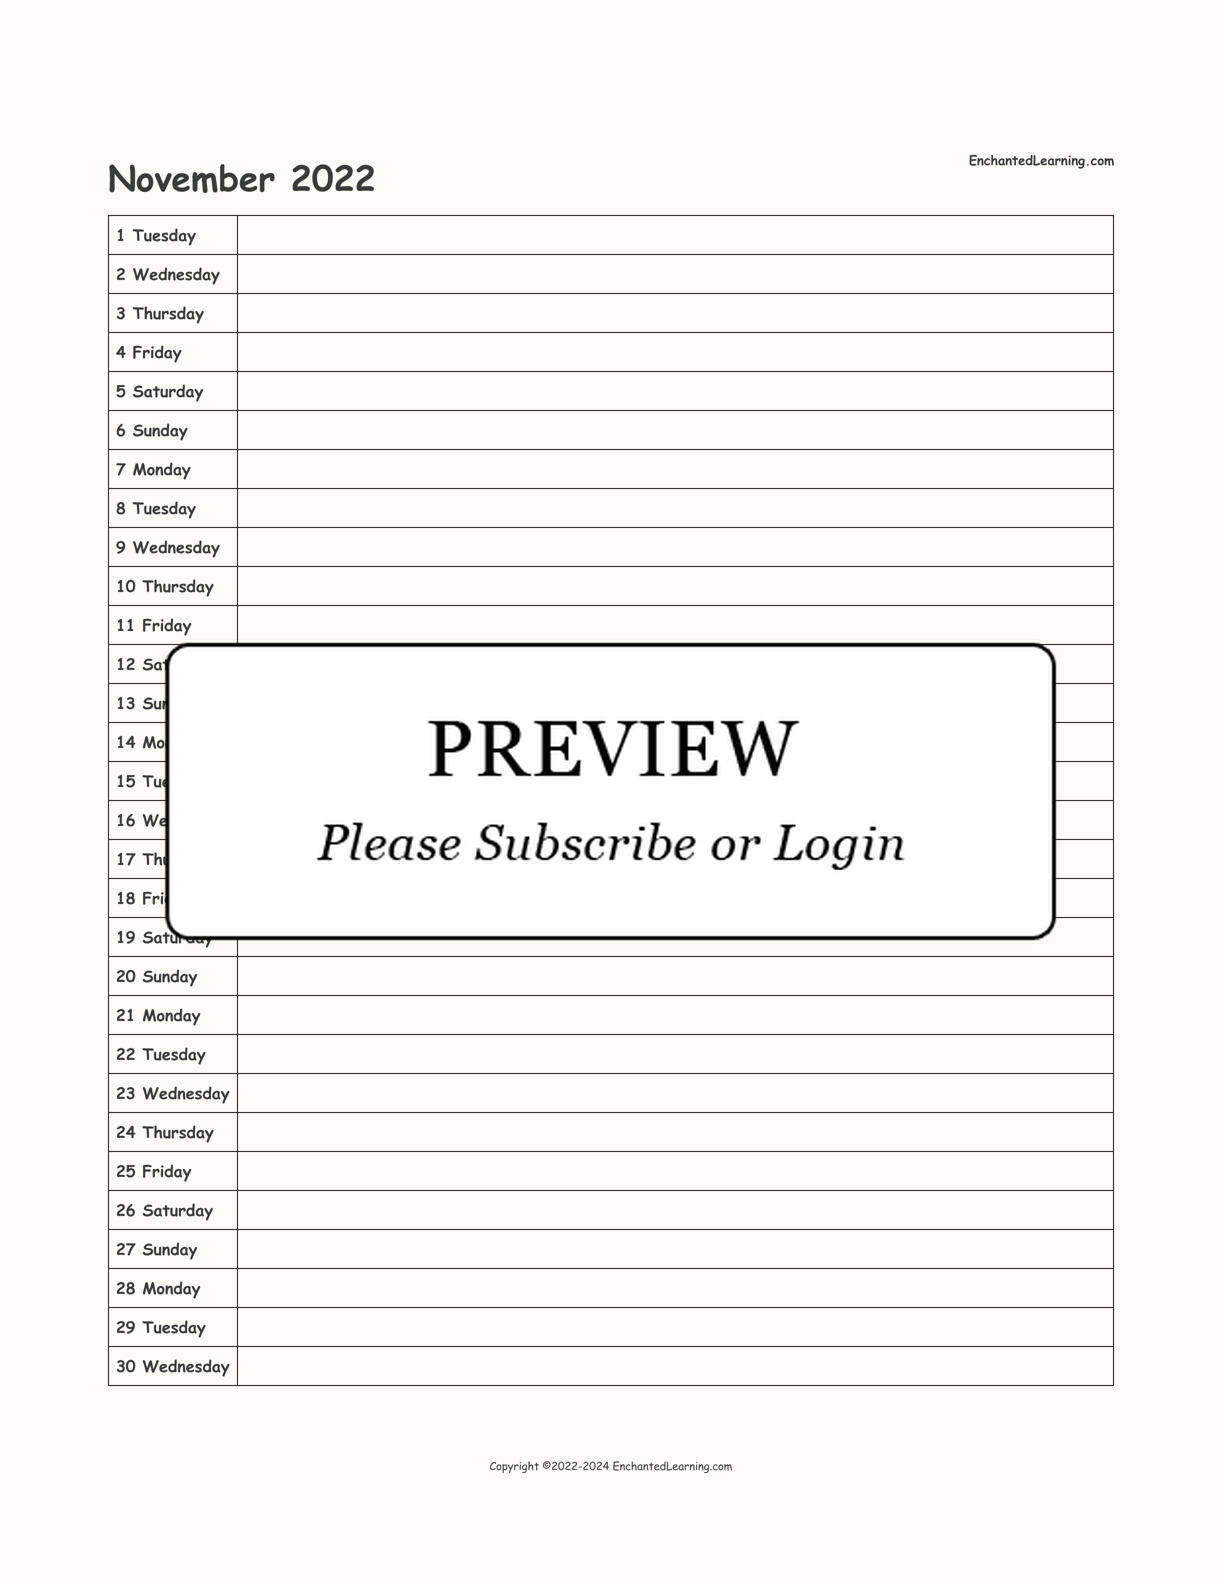 2022 Scheduling Calendar interactive printout page 11